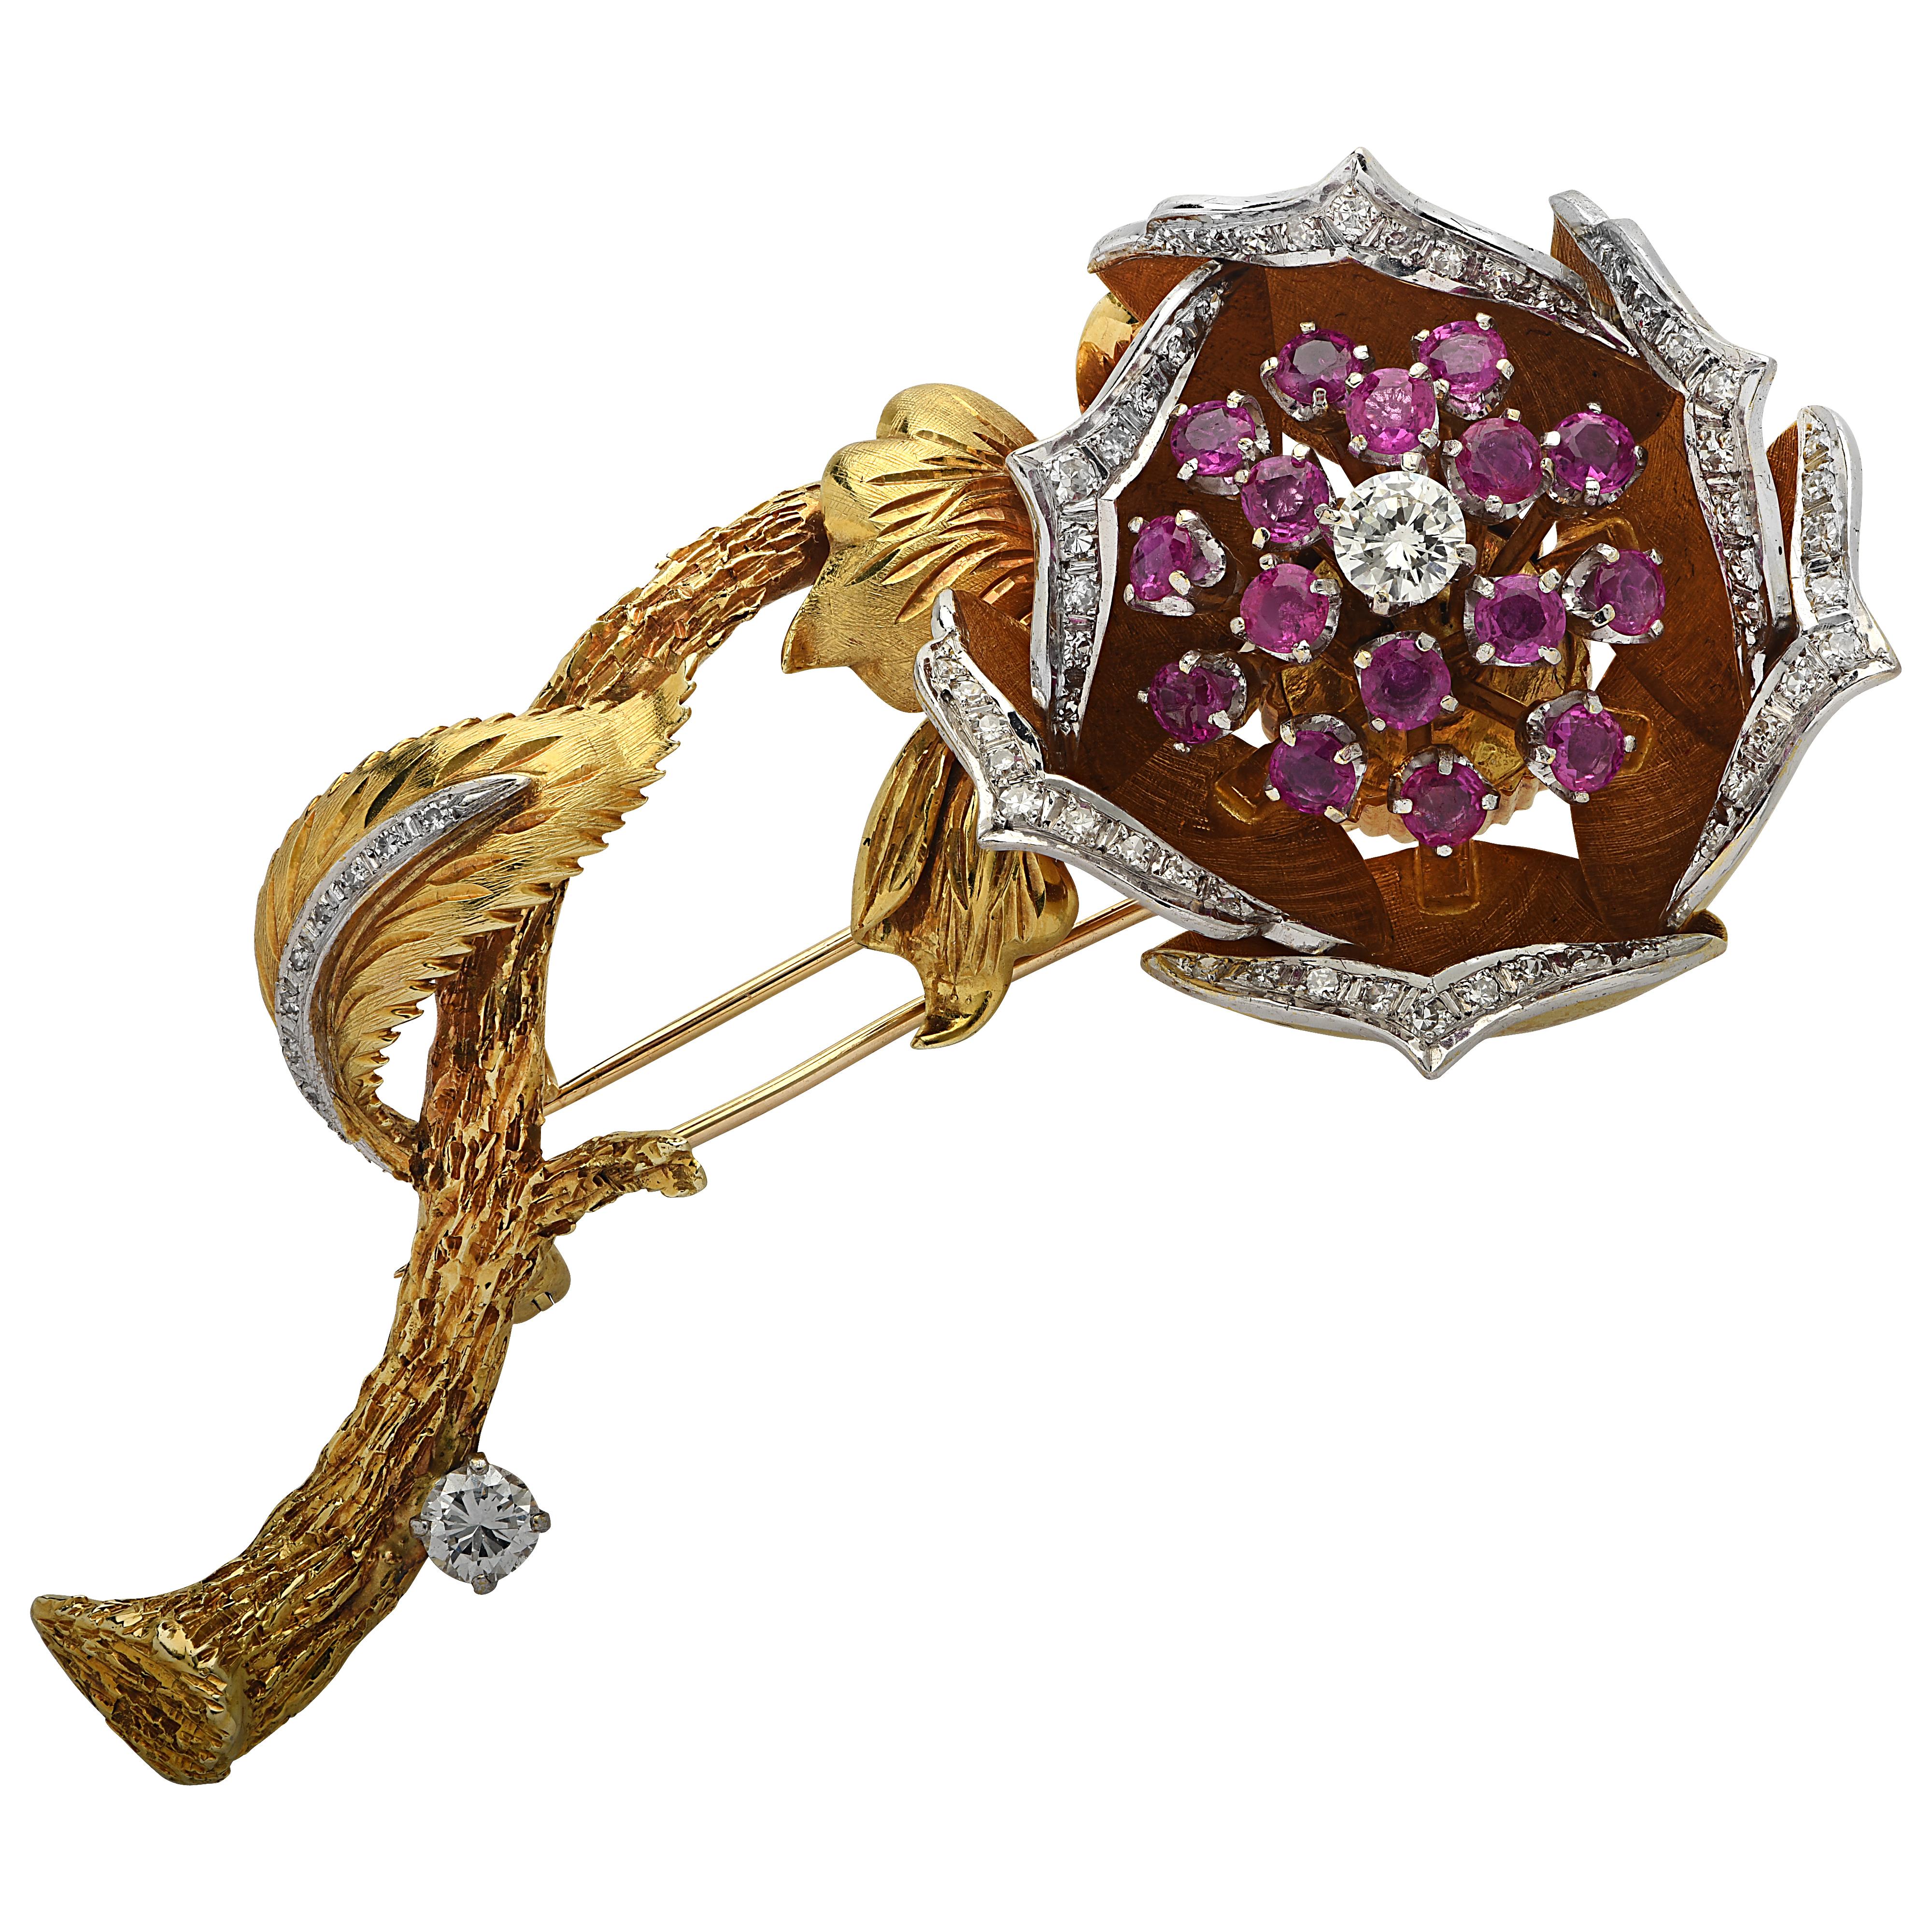 Enchanting brooch pin circa 1970s crafted in 18 karat yellow and white gold featuring 66 round brilliant cut diamonds weighing approximately 1 carat total, G color, VS-SI clarity, and 16 round rubies weighing approximately 2 carats total. The brooch